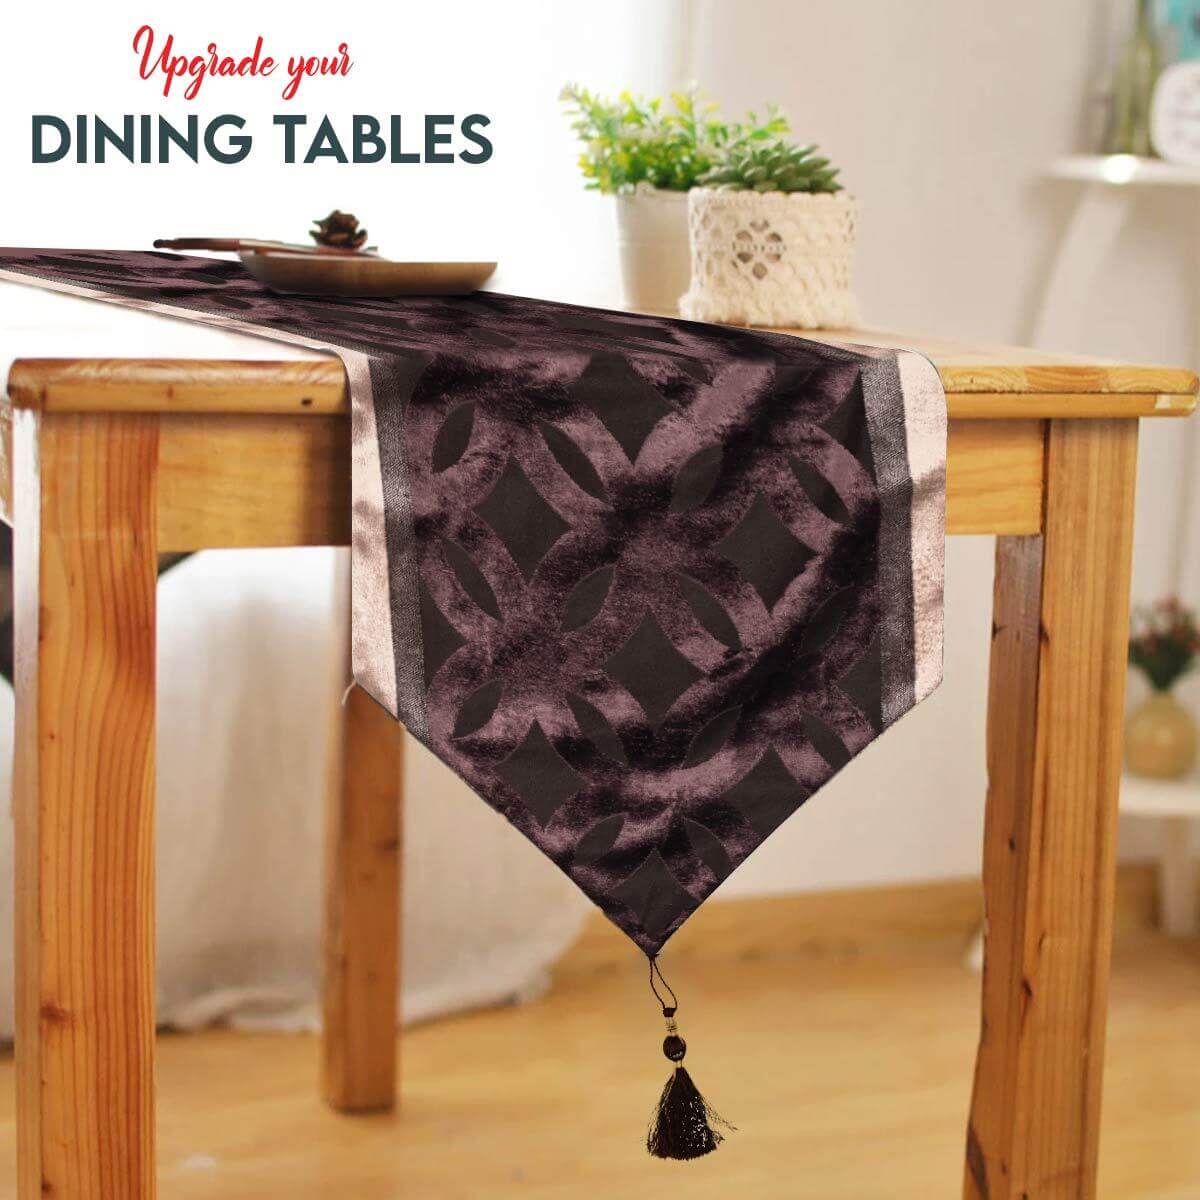 How to Use Table Runners to Elevate Dining Table?